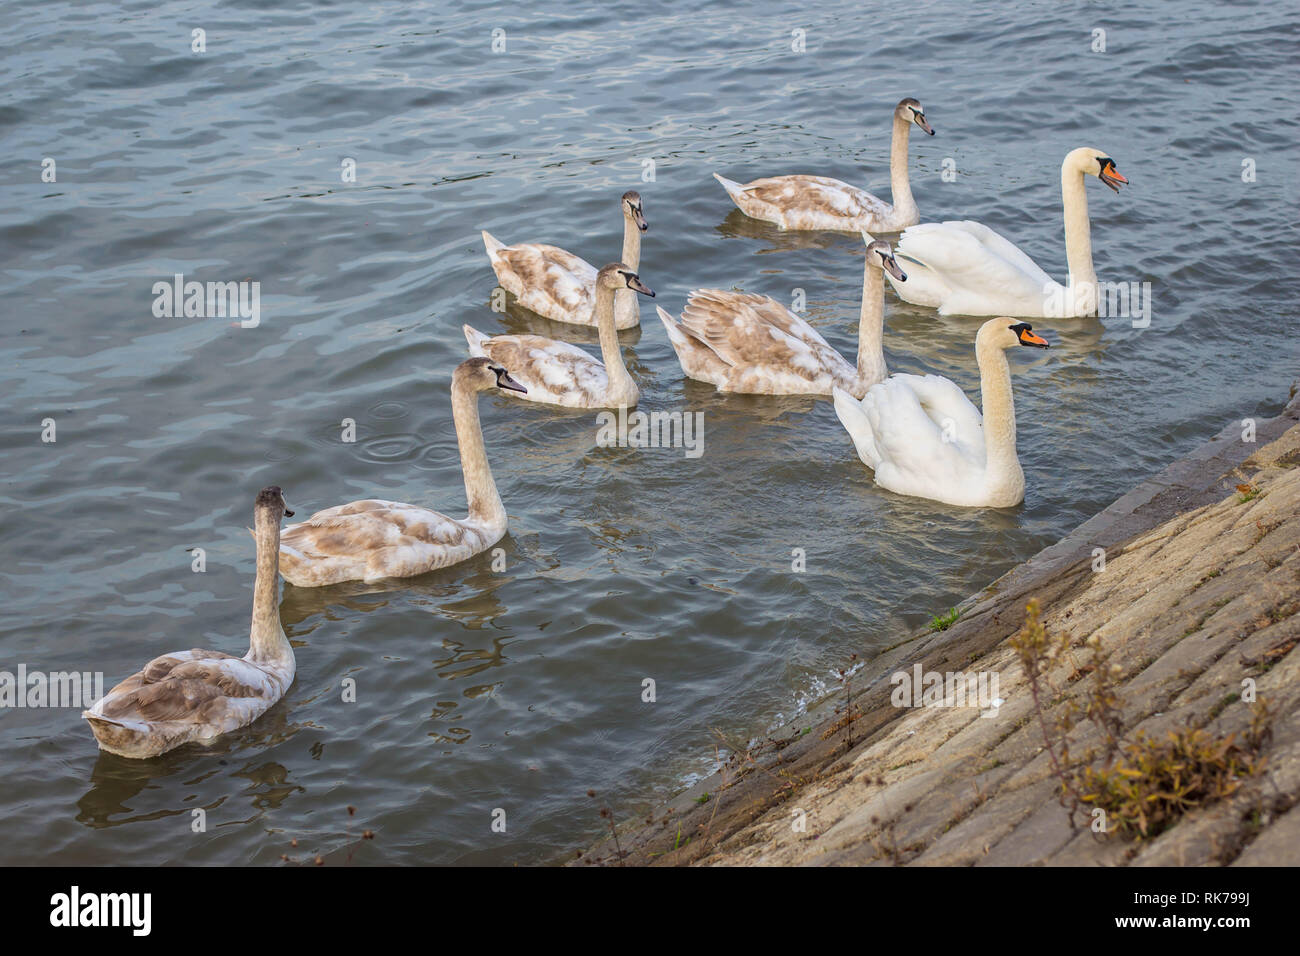 Family of mute swan  latin name Cygnus olor - two adults and six subadults in the Danube river in Belgrade Stock Photo